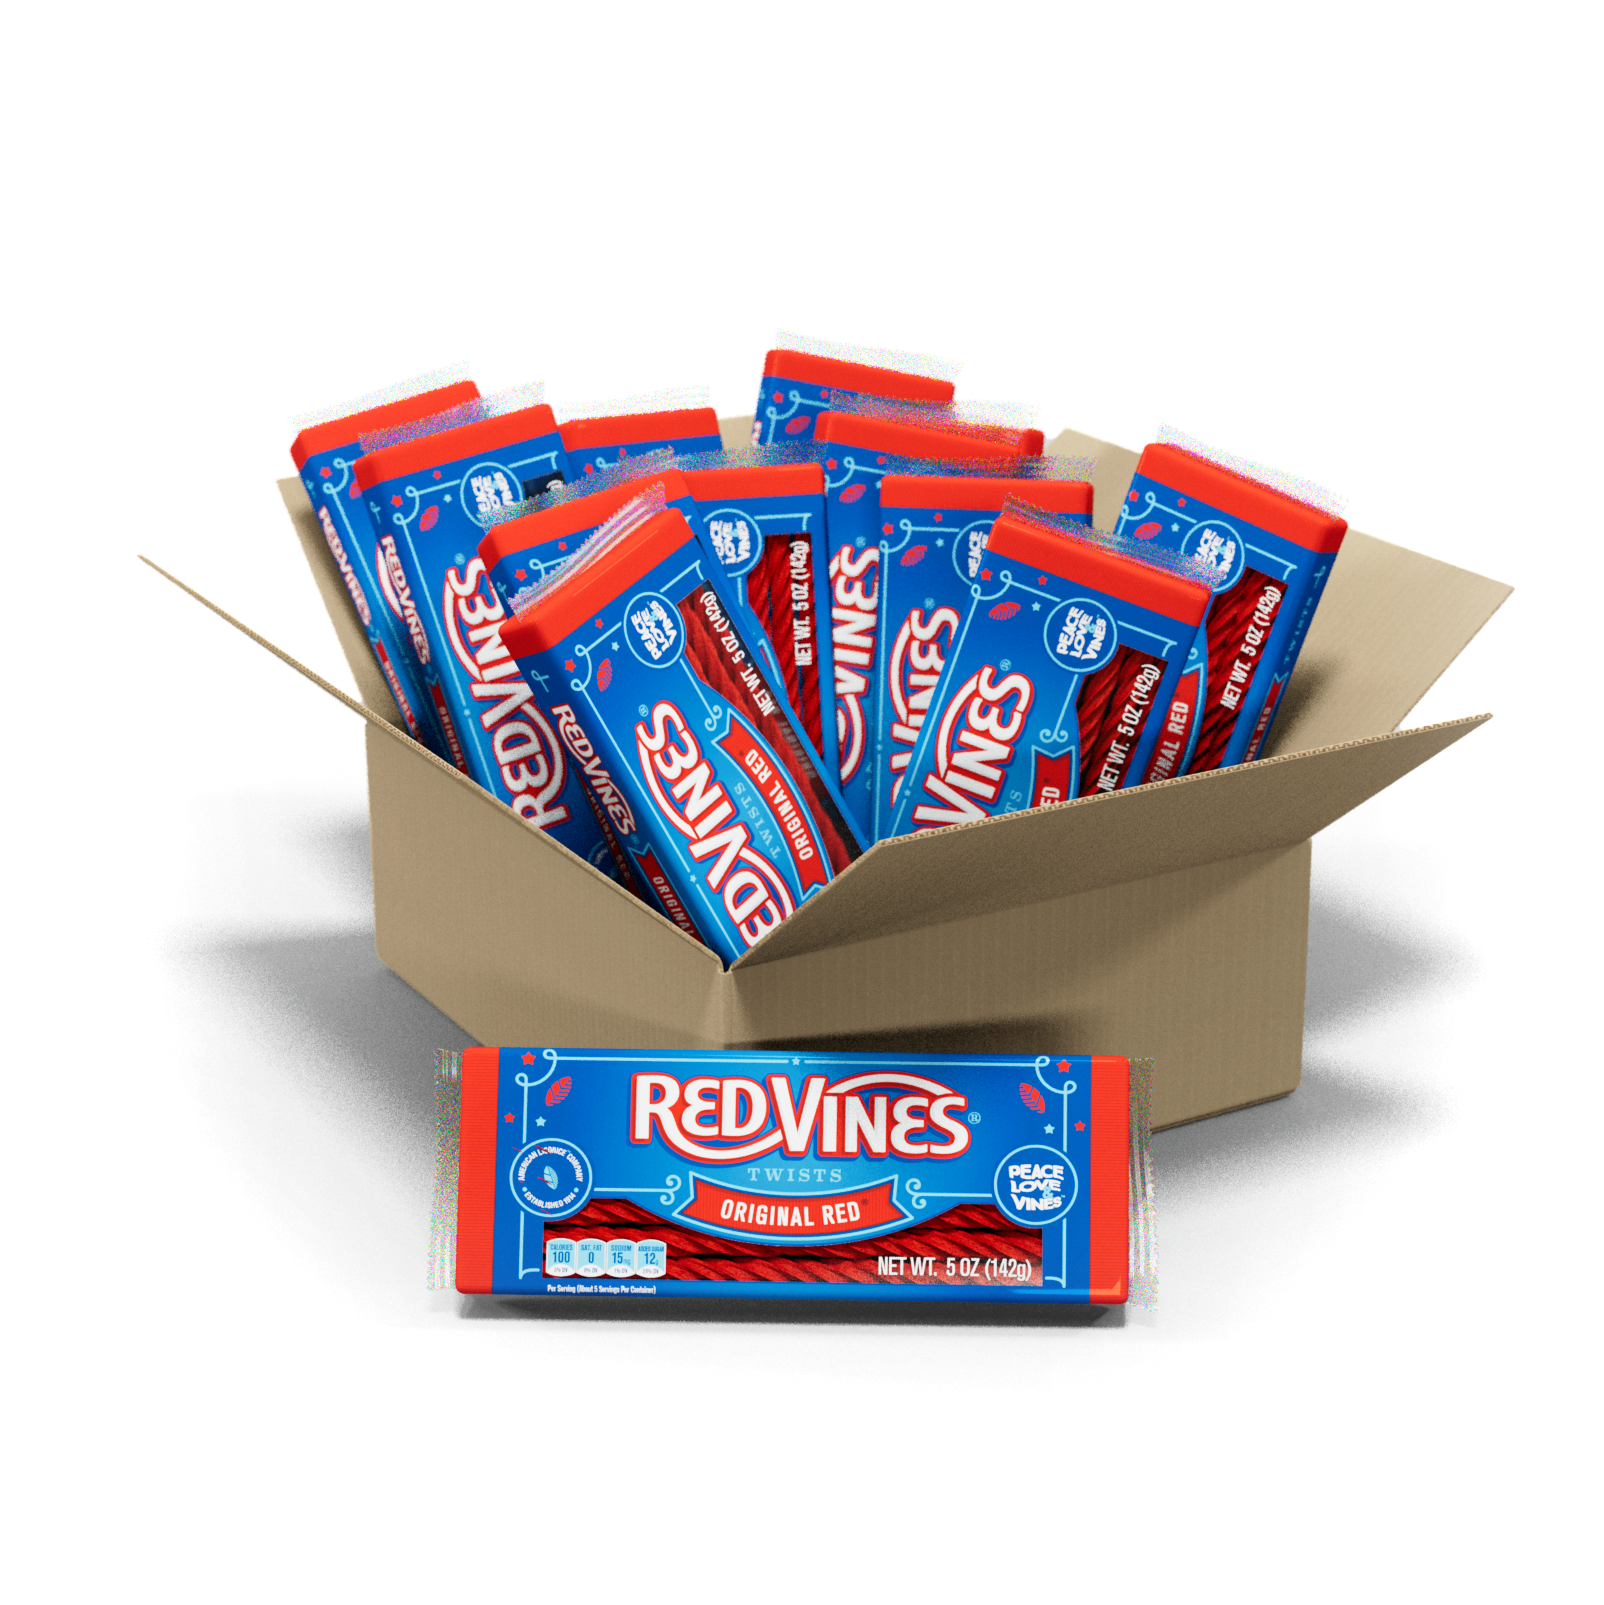 12 count box of 5oz Red Vines Original Red Licorice Candy